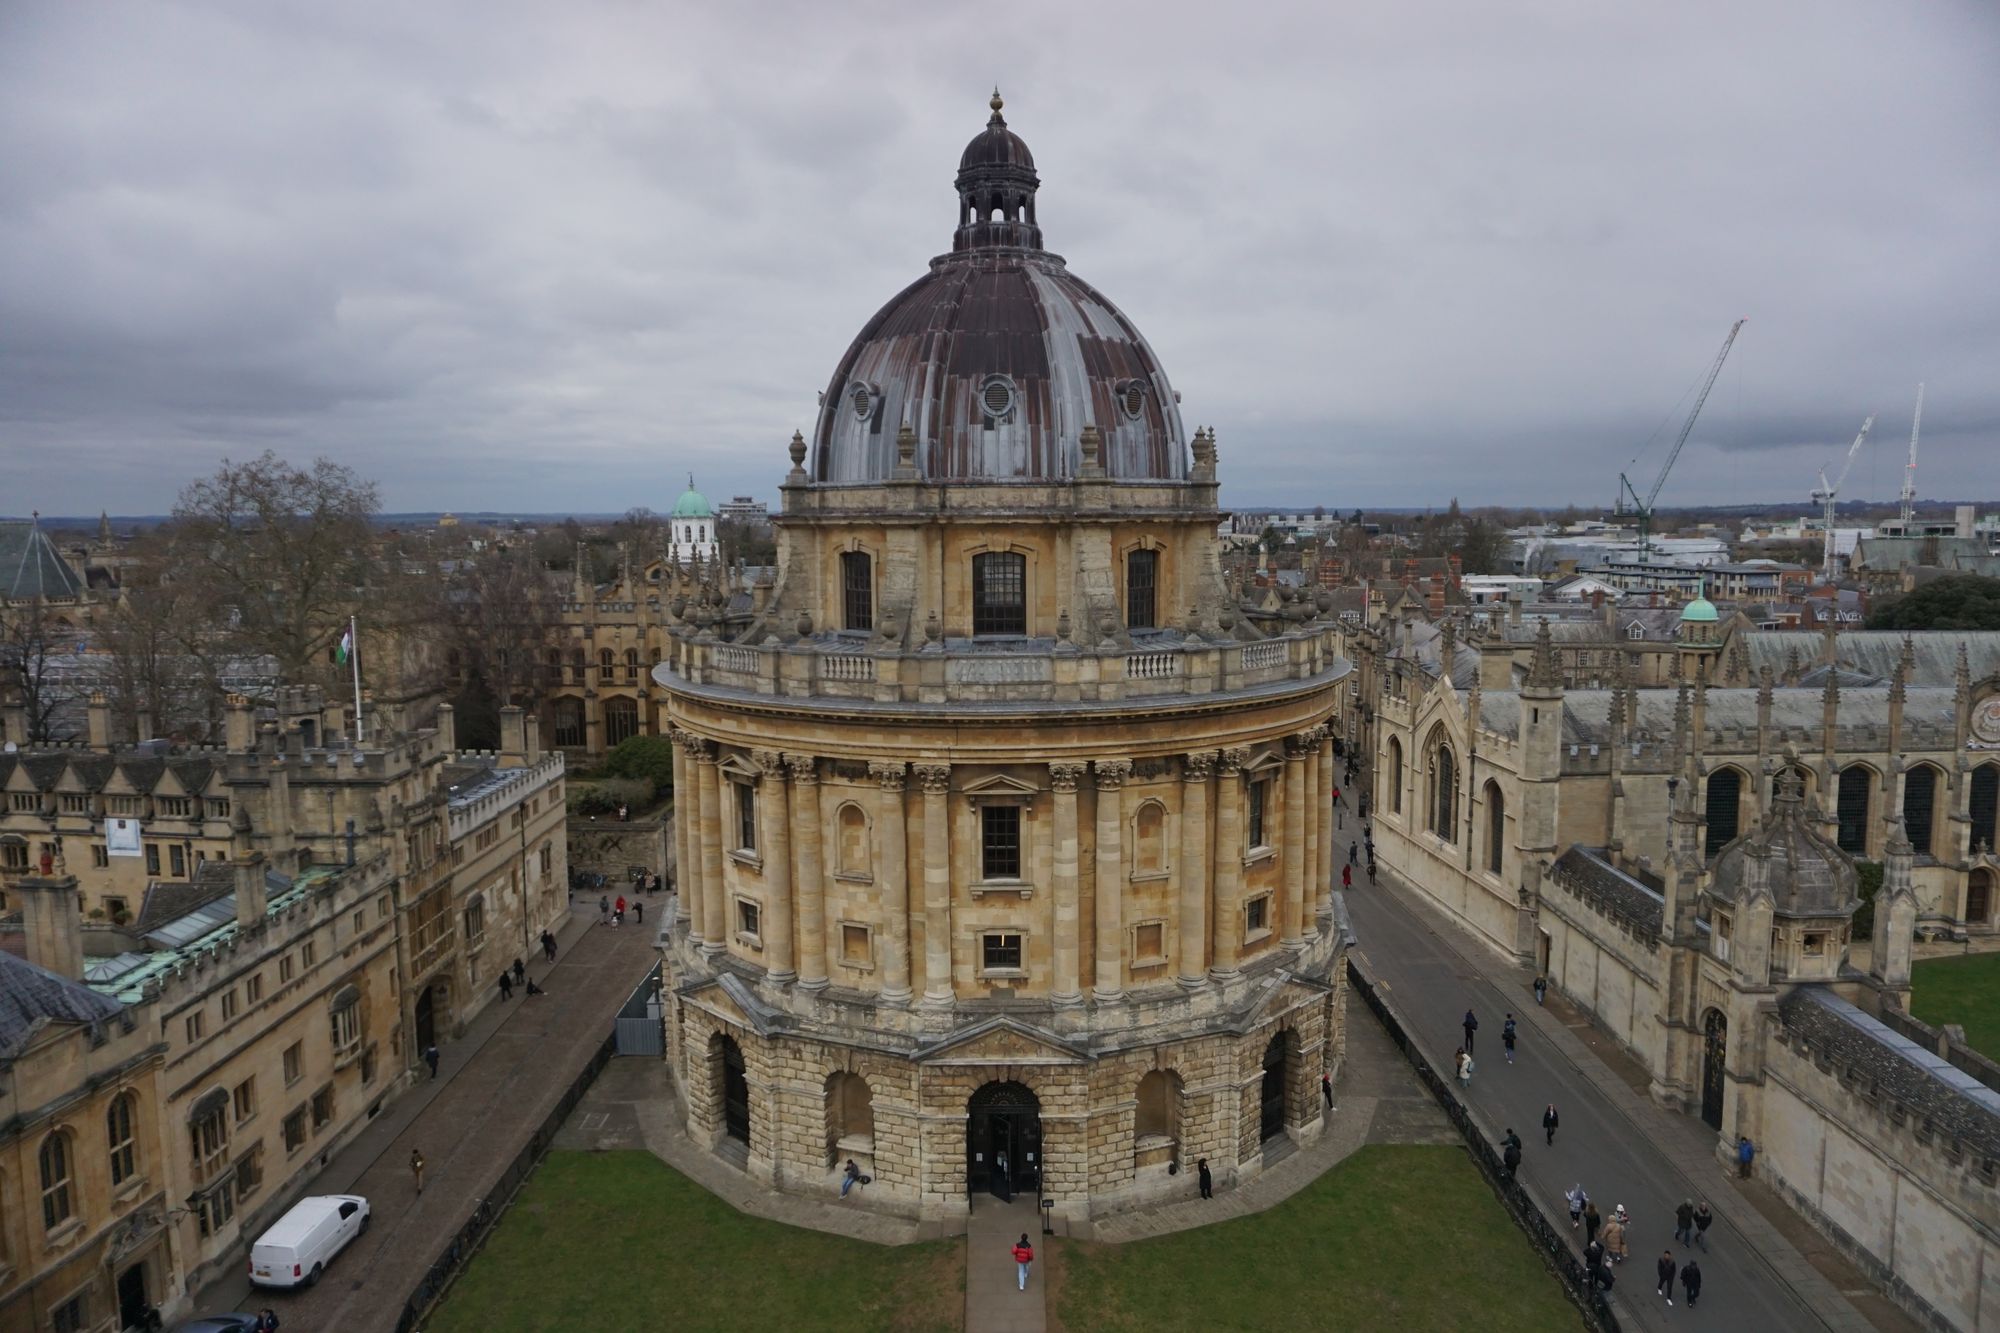 The Radcliffe Camera, an old circular stone building with a dome, in the centre of a pedestrianised square with drab greenery around it. A person in a red jacket walks towards the entrance.